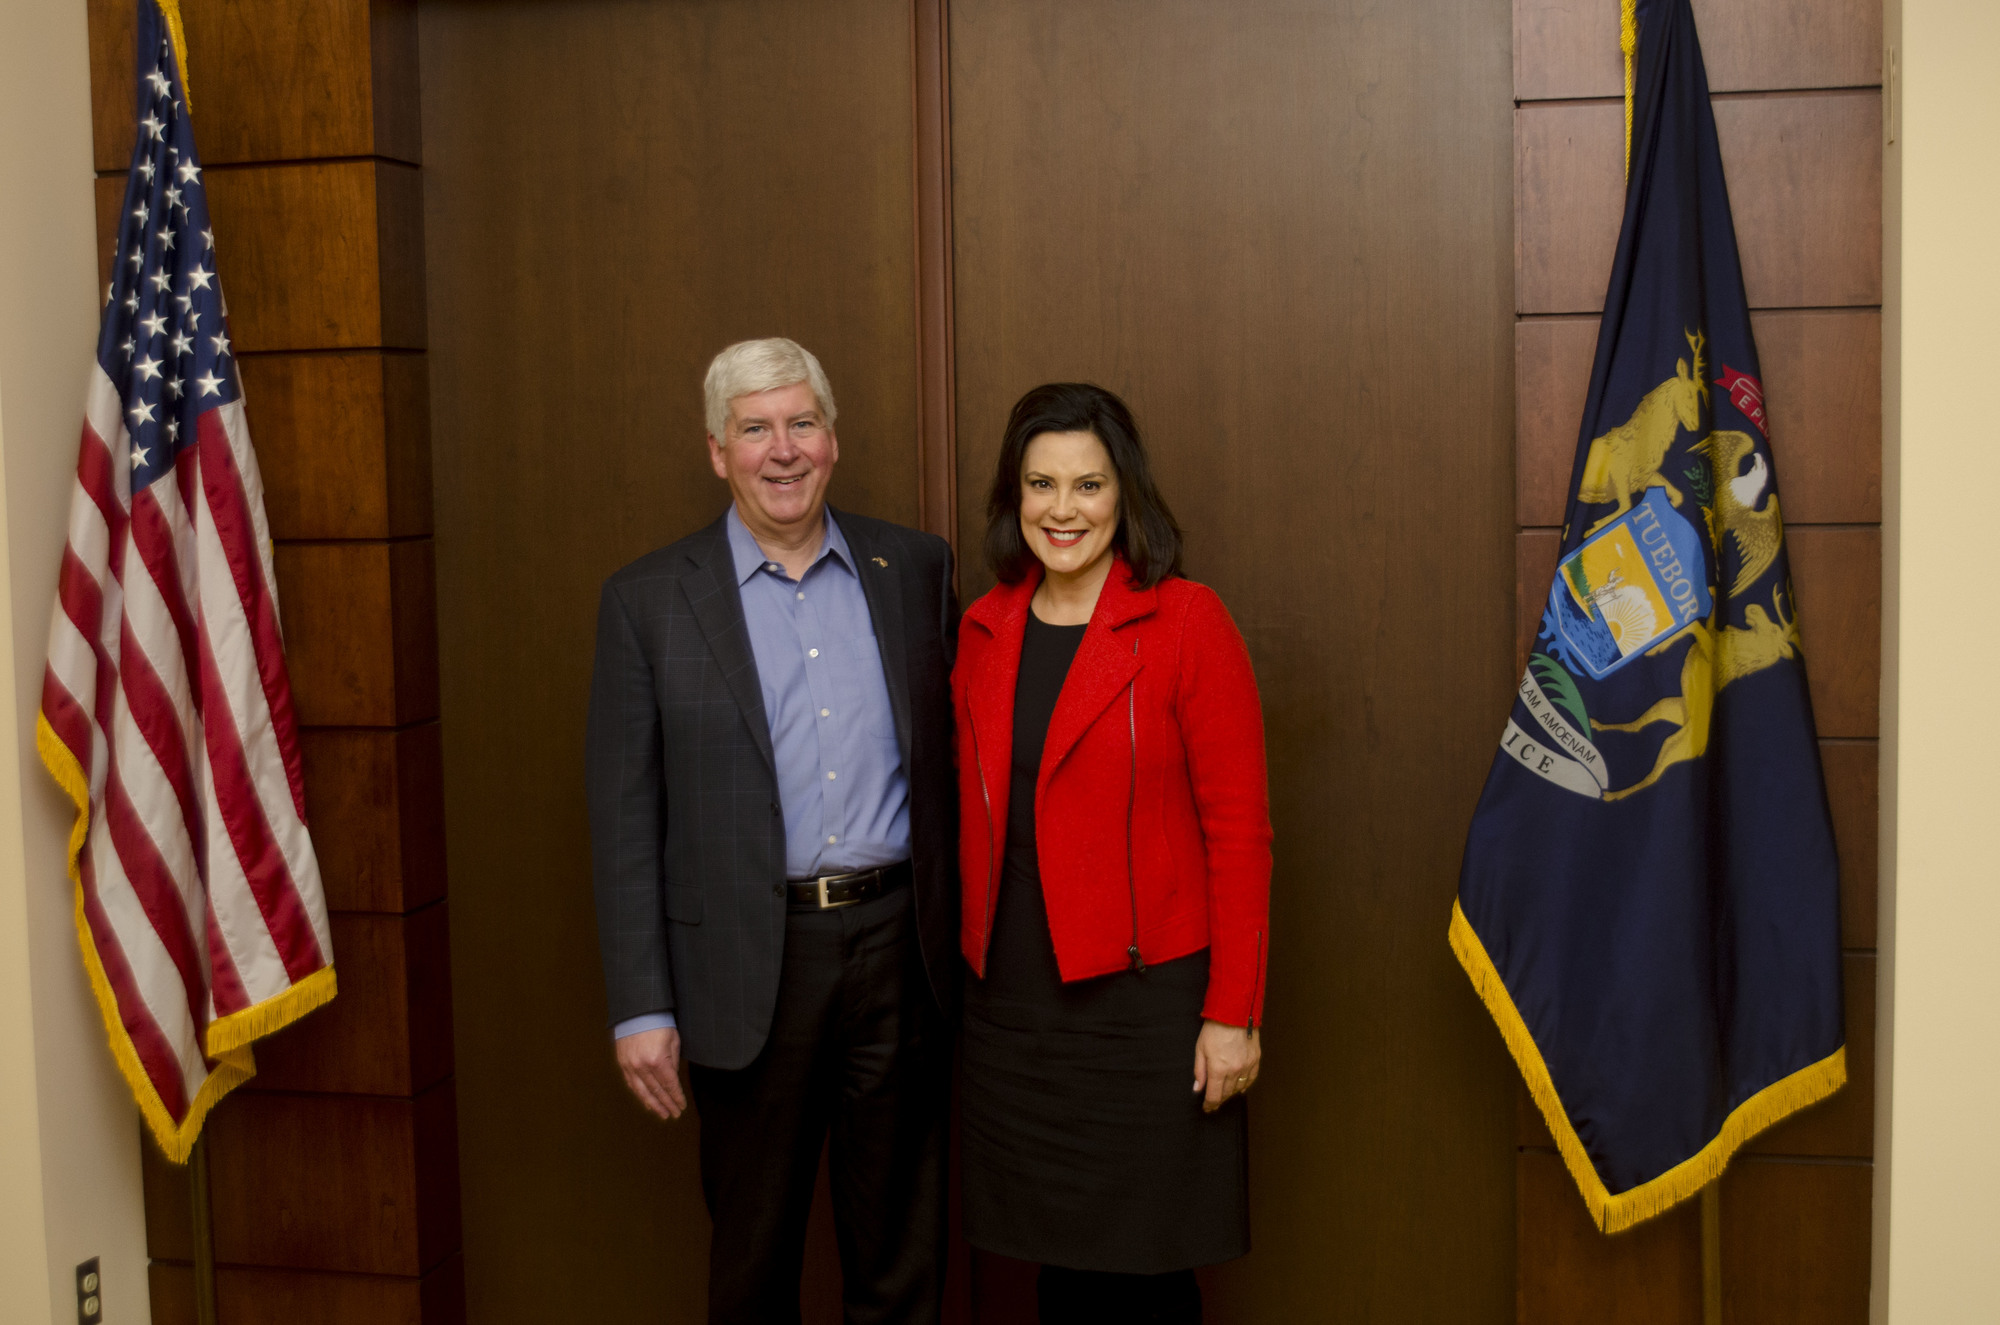 Gov. Snyder meets with Governor-elect Gretchen Whitmer